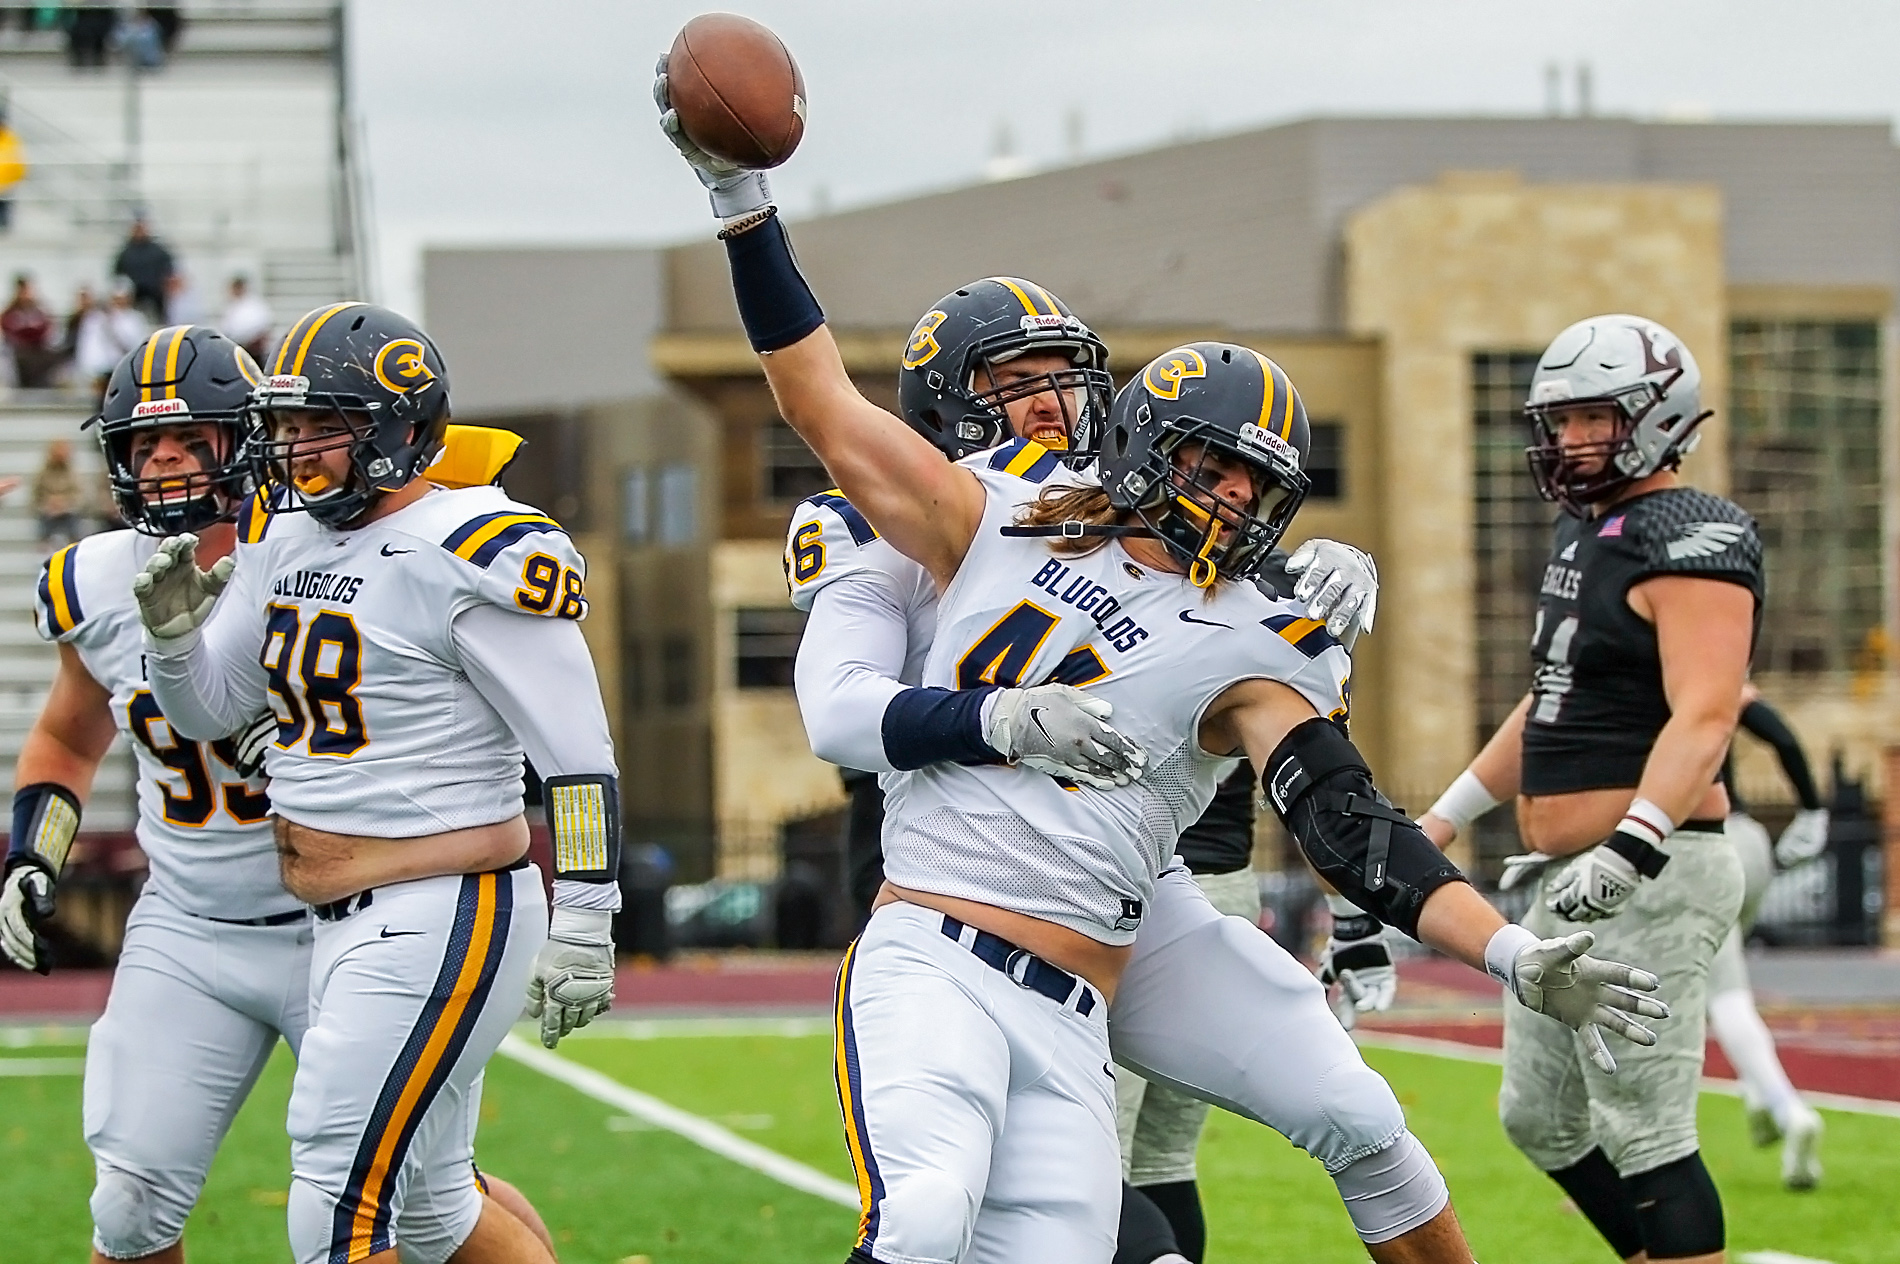 Blugolds fall to No. 13 Eagles in season finale